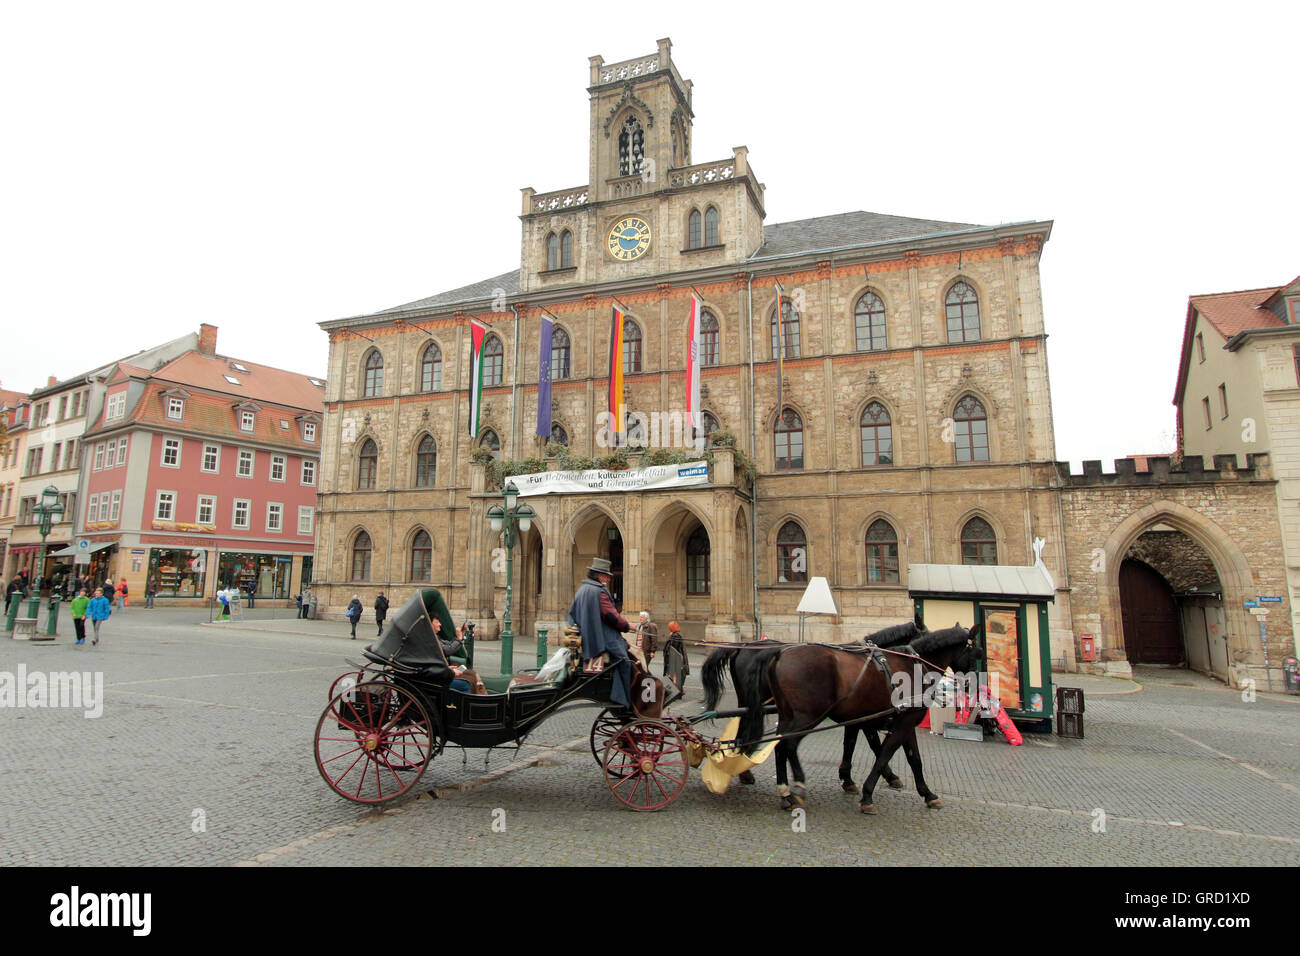 Weimar Town Hall With Horse Drawn Carriage In Weimar Stock Photo